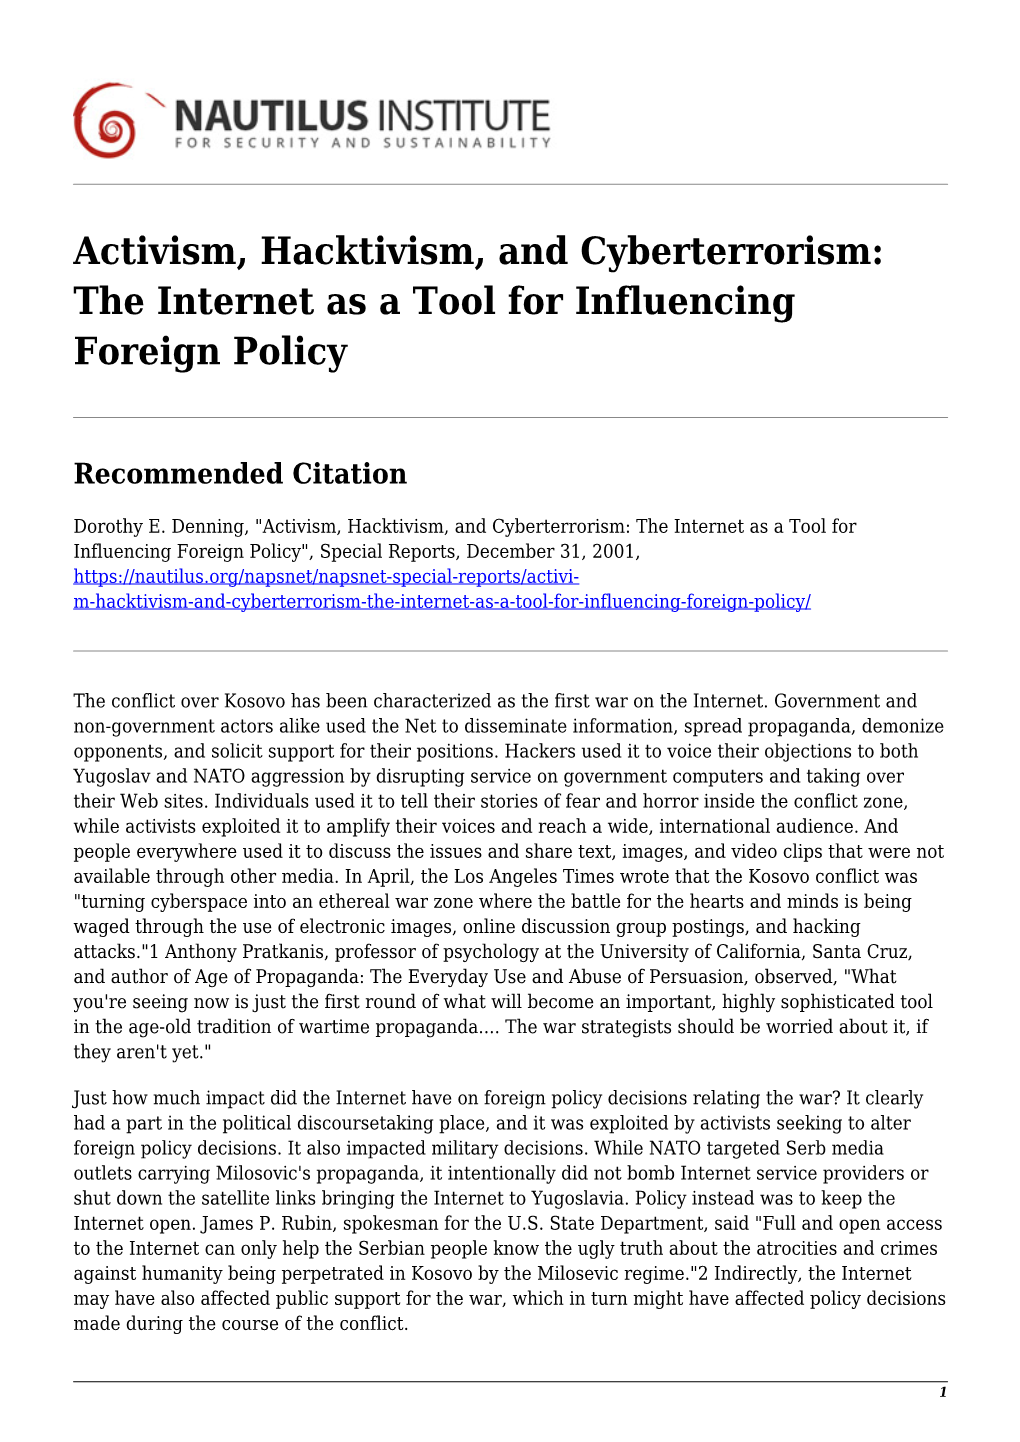 Activism, Hacktivism, and Cyberterrorism: the Internet As a Tool for Influencing Foreign Policy